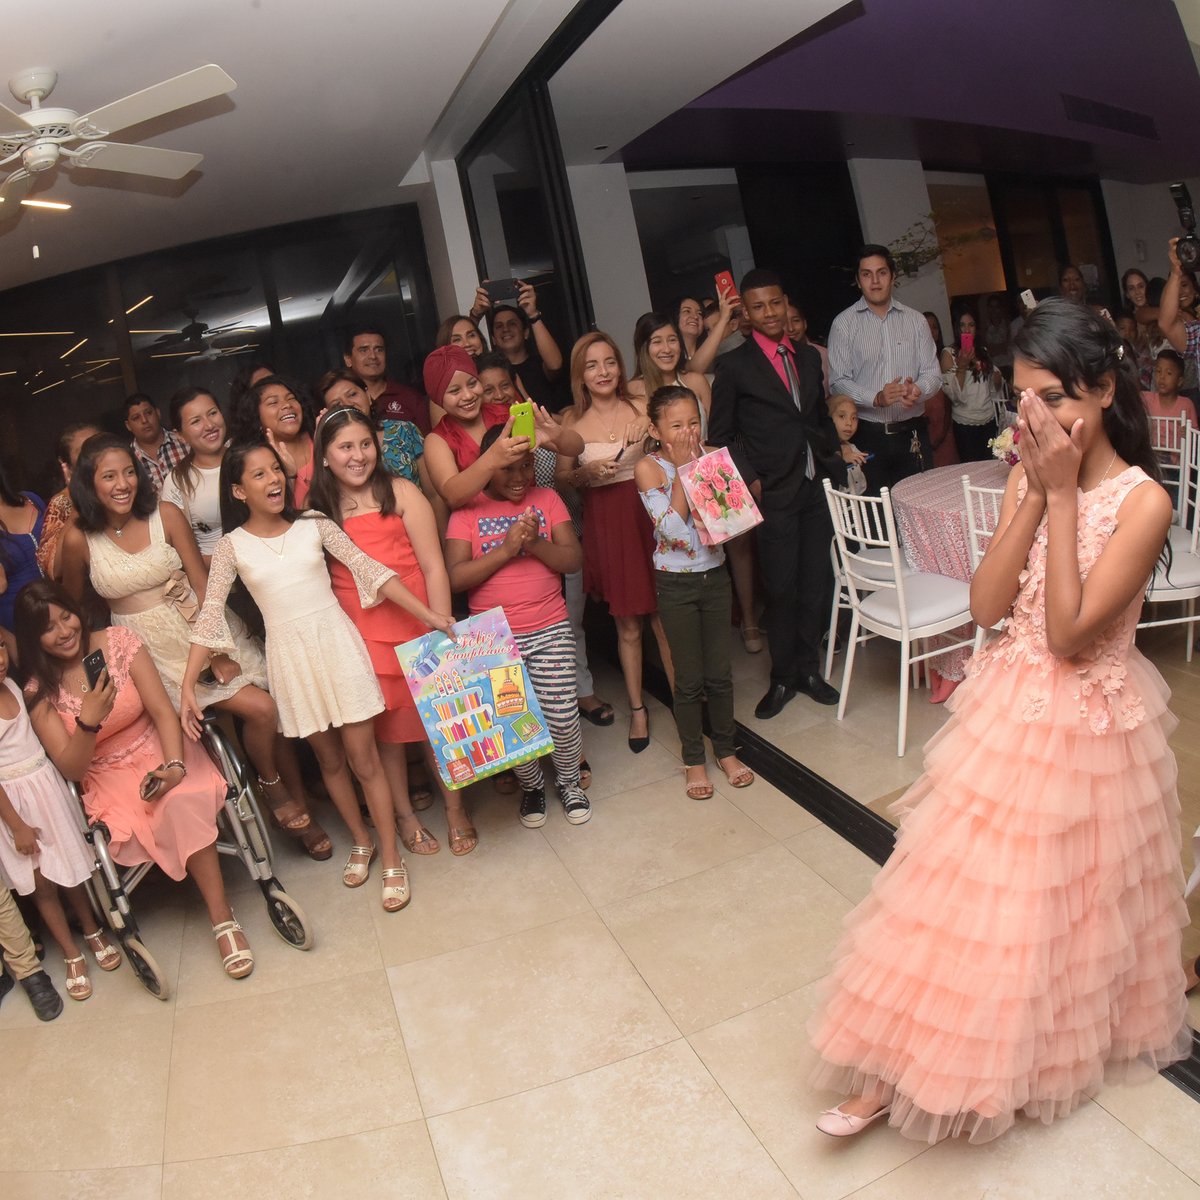 While Karen was battling cancer, her family stayed at the Ronald McDonald House in Ecuador. After many treatments, Karen was told she had months to live. She always dreamed of having a quinceañera, so the RMHC community made sure she had the party she always wanted. 💙✨ #RMHC50